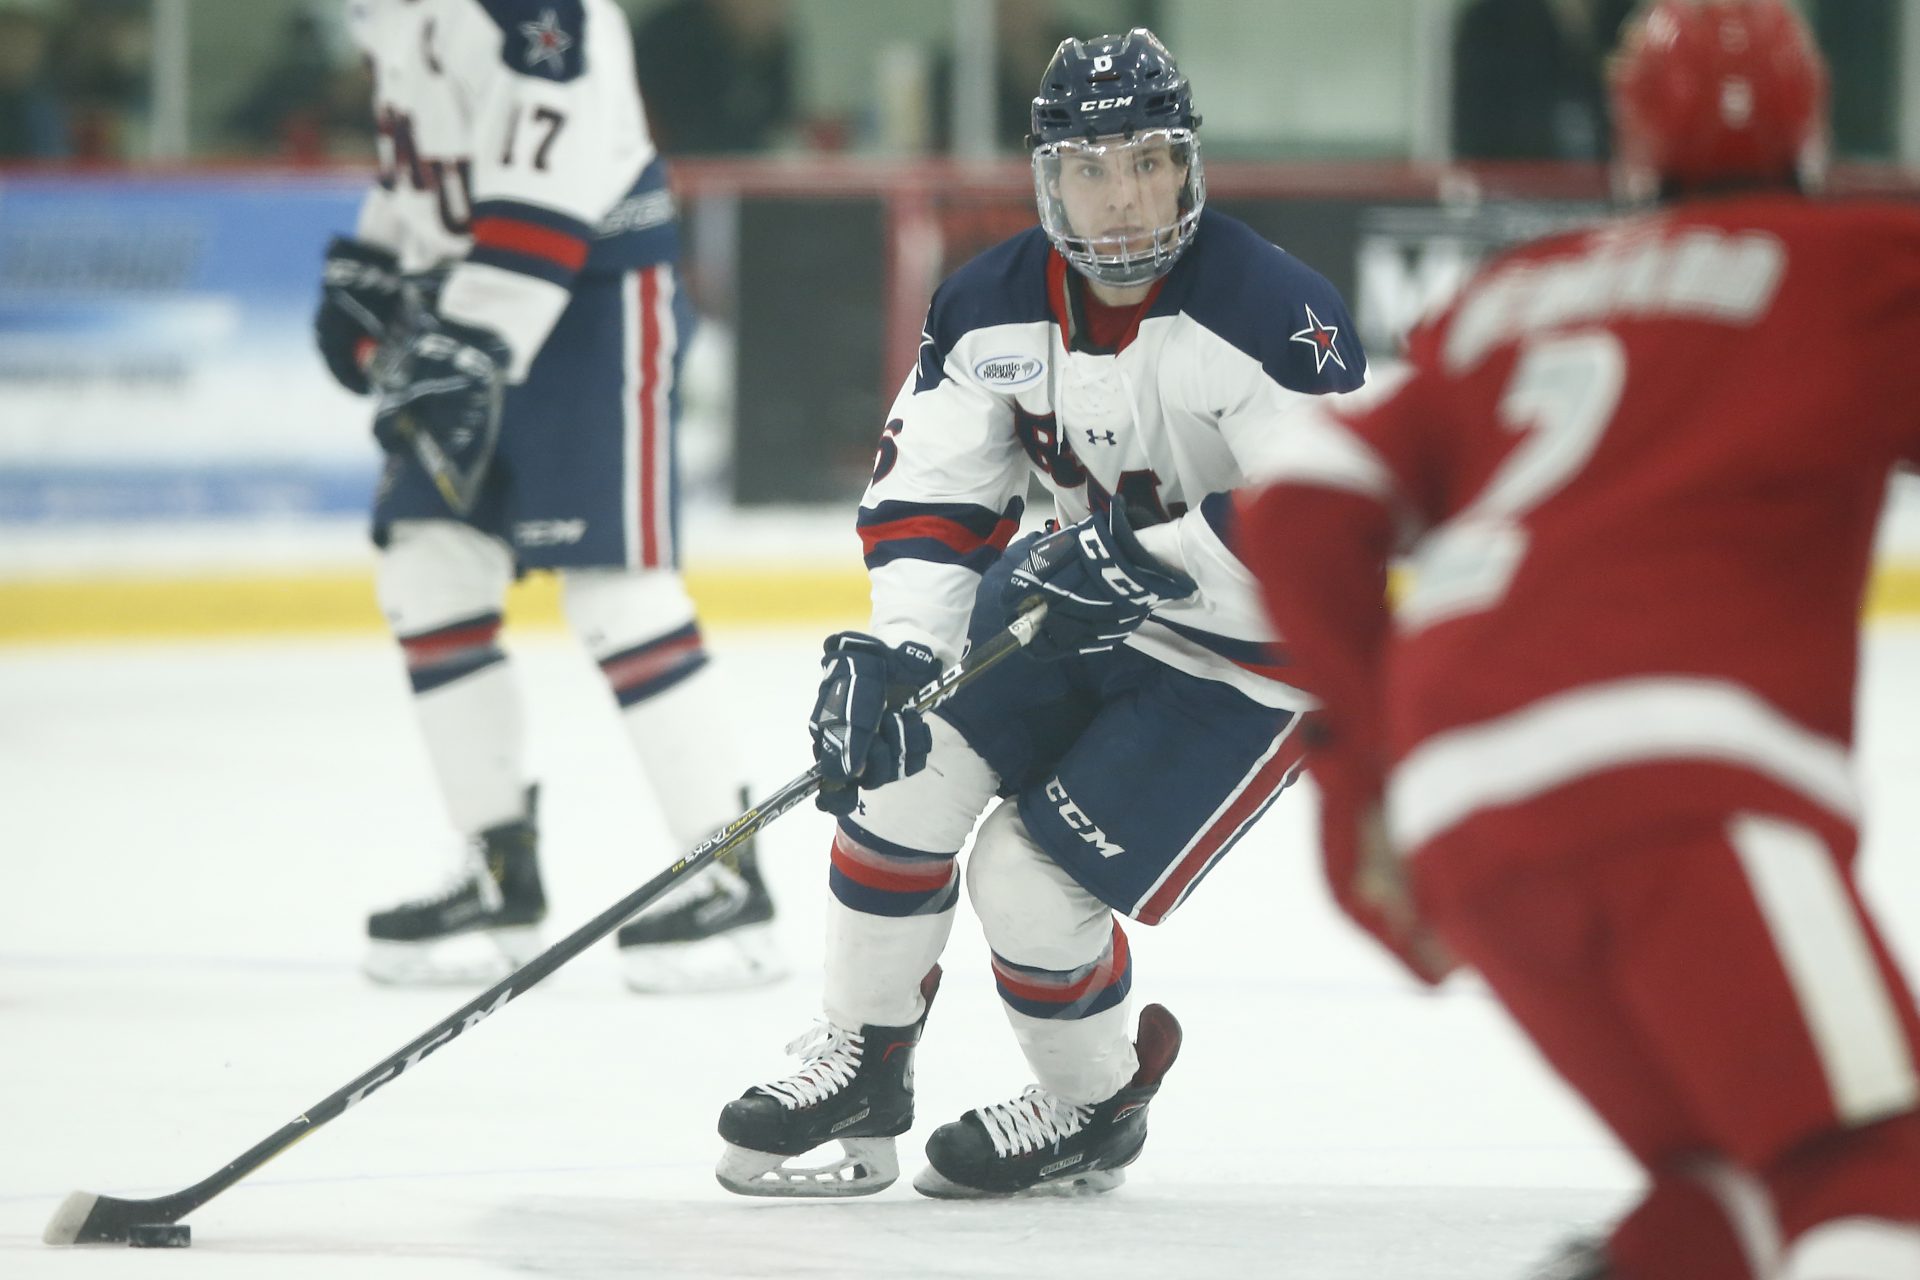 Nick Jenny of the Robert Morris Colonials carries the puck during a Robert Morris University and Sacred Heart University NCAA hockey game on Friday, Feb.1, 2019 in Pittsburgh